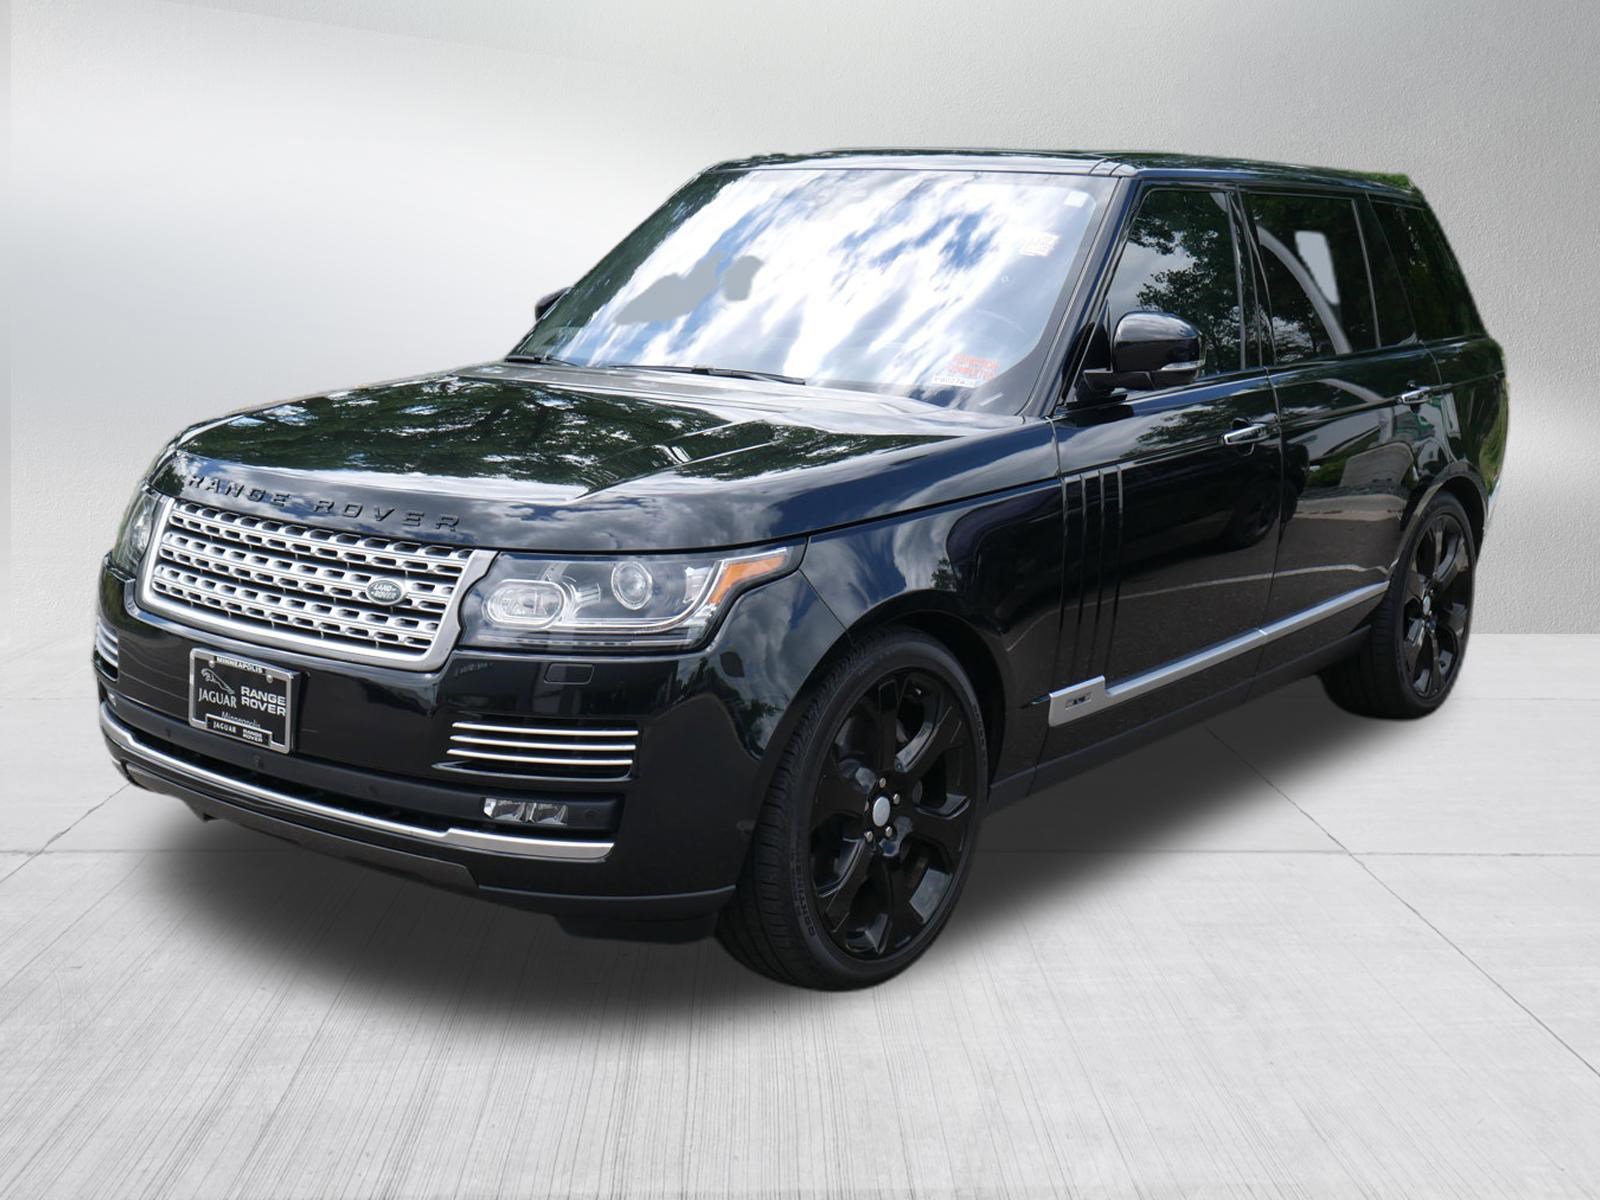 Pre-Owned 2017 Land Rover Range Rover Autobiography Sport Utility in  Minneapolis #P8027A | Land Rover Minneapolis